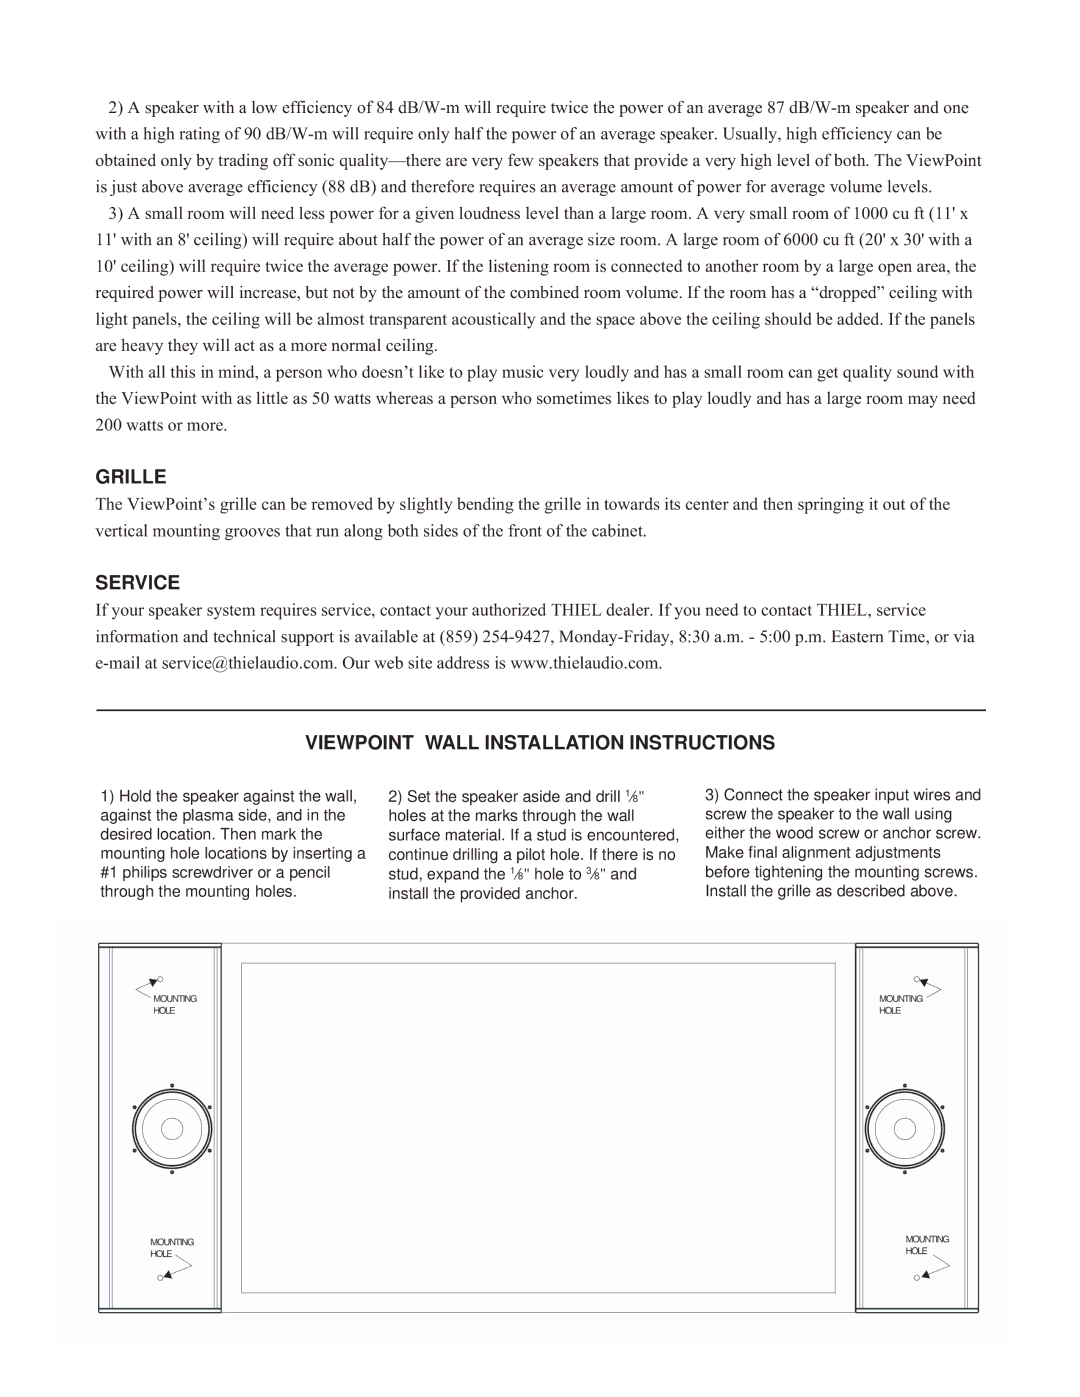 Thiel Audio Products ViewPoint manual Grille, Service Viewpoint Wall Installation Instructions 